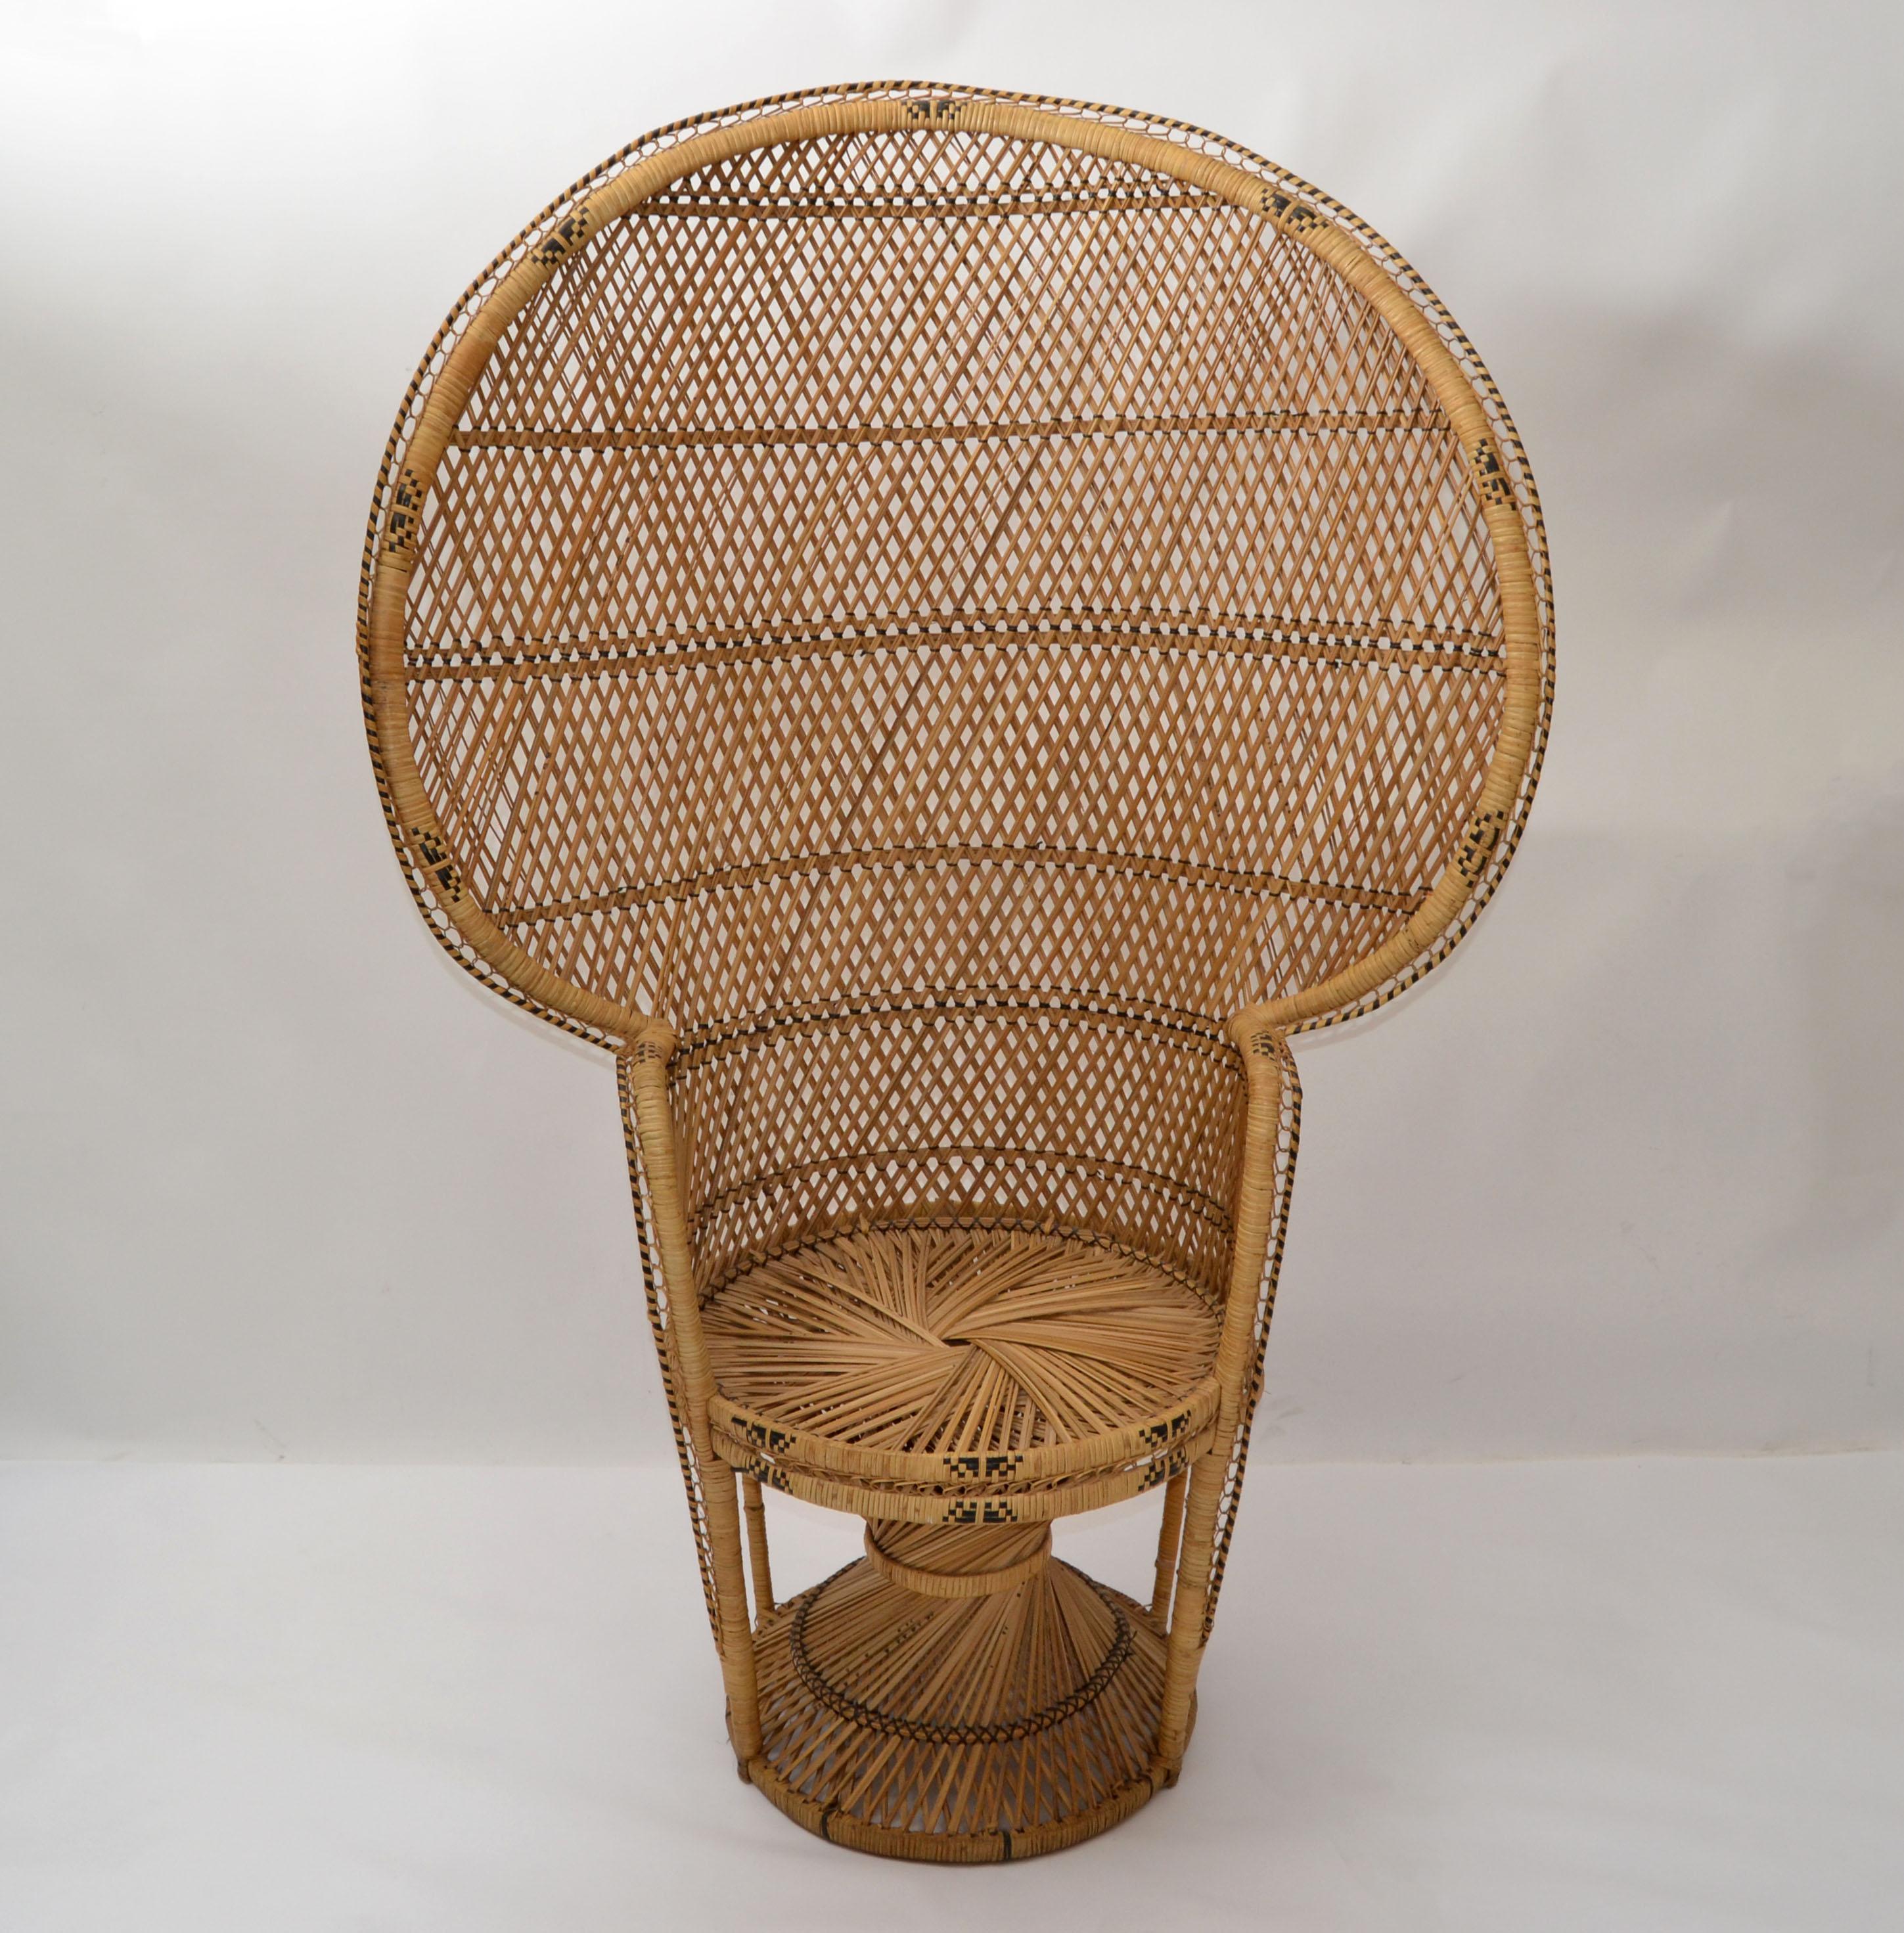 Vintage Boho Chic Handcrafted Beige & Black Wicker, Rattan, Reed Peacock Chair For Sale 7